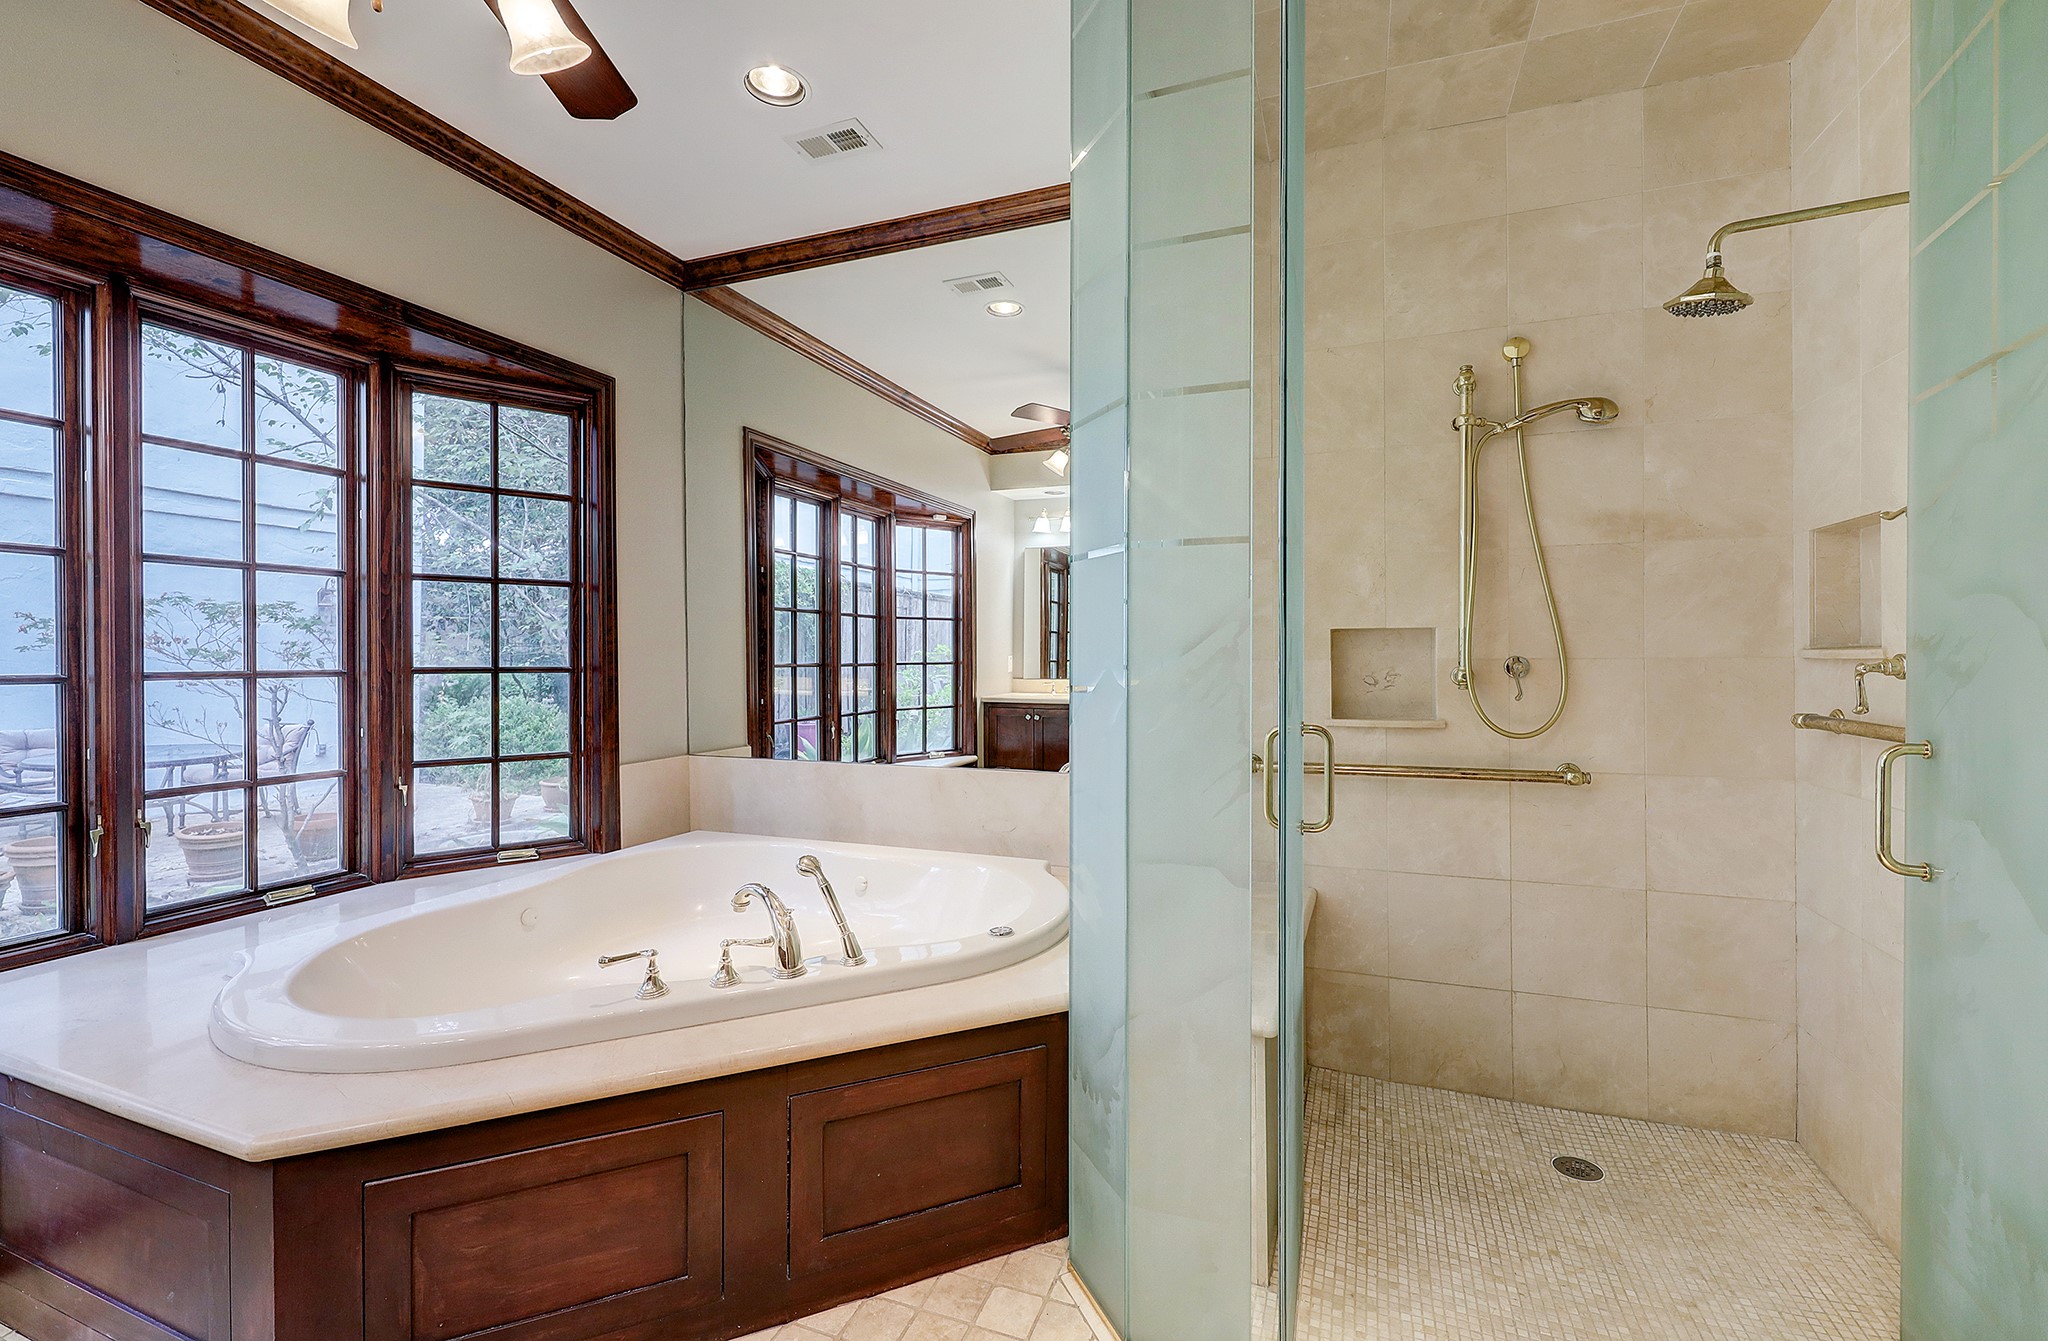 Primary Bathroom with Jacuzzi Tub and Separate Shower.